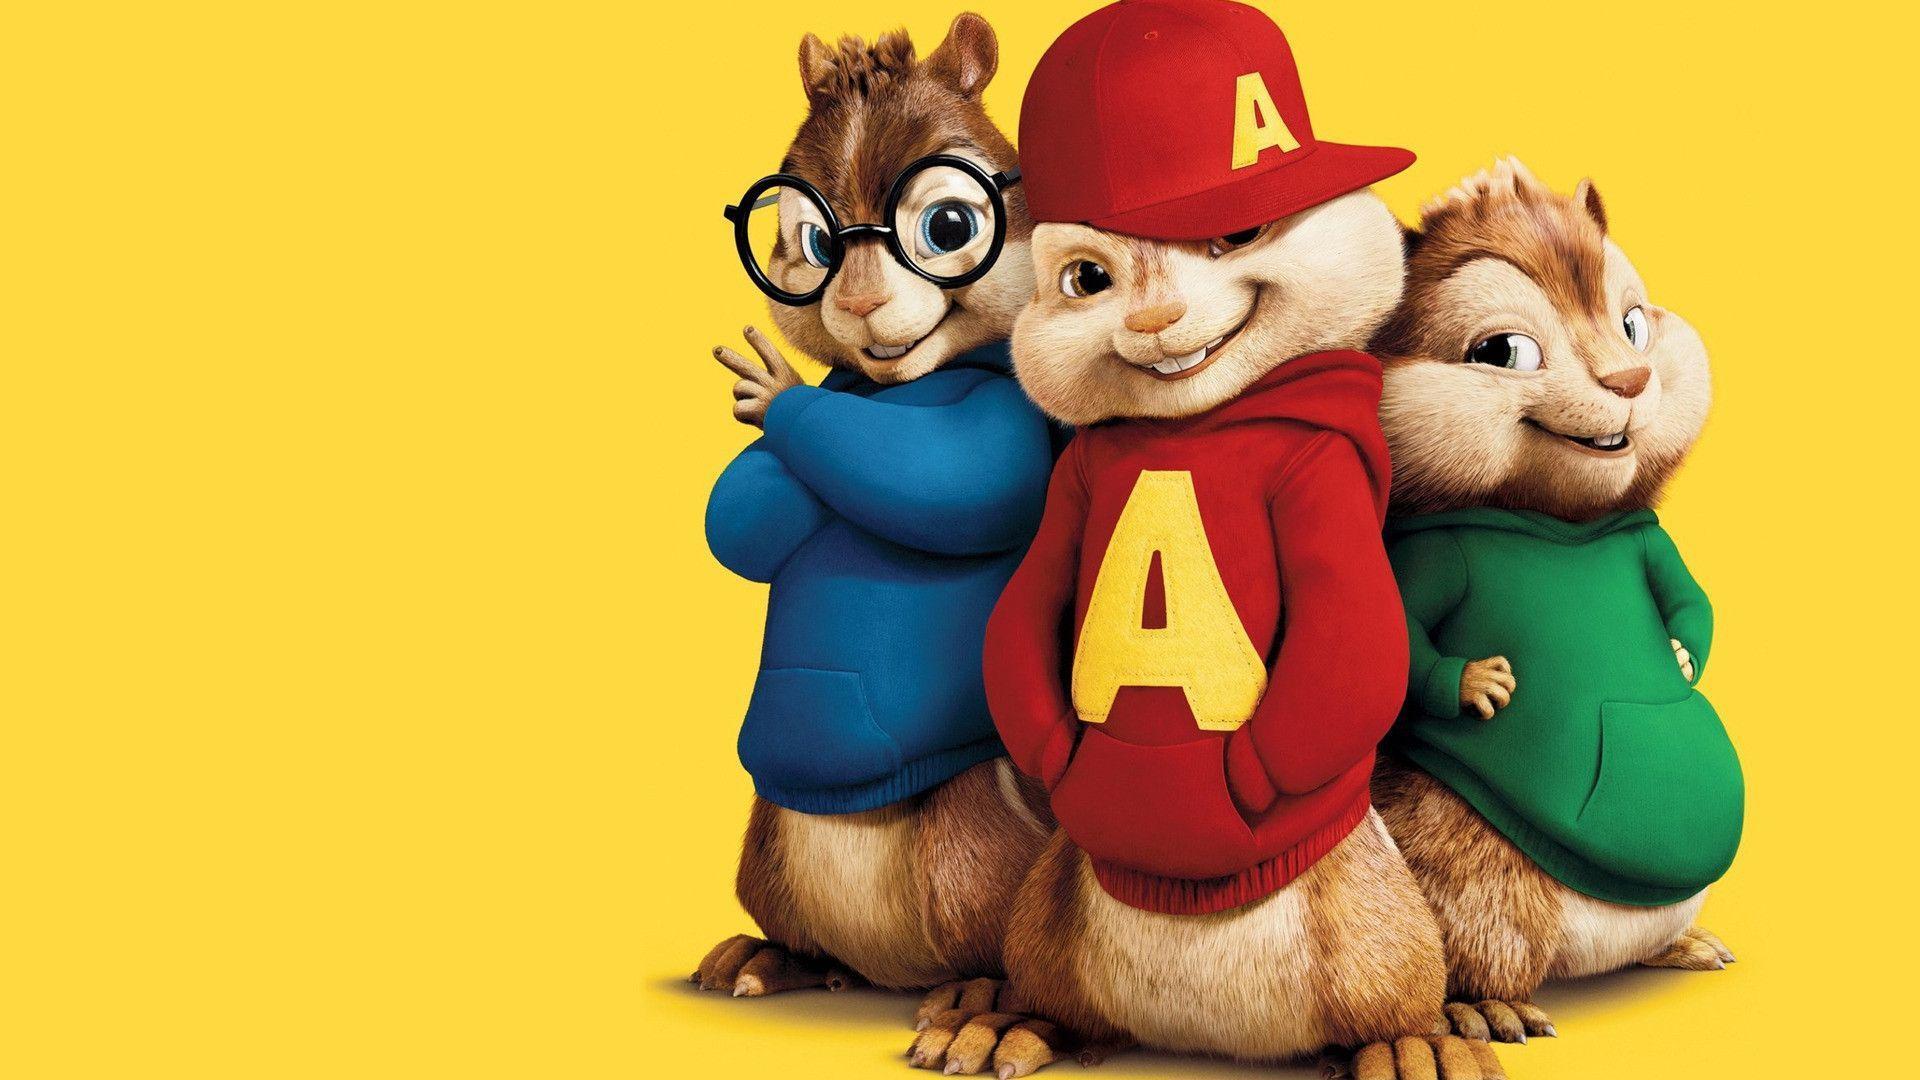 Alvin And The Chipmunks Free Games To Play